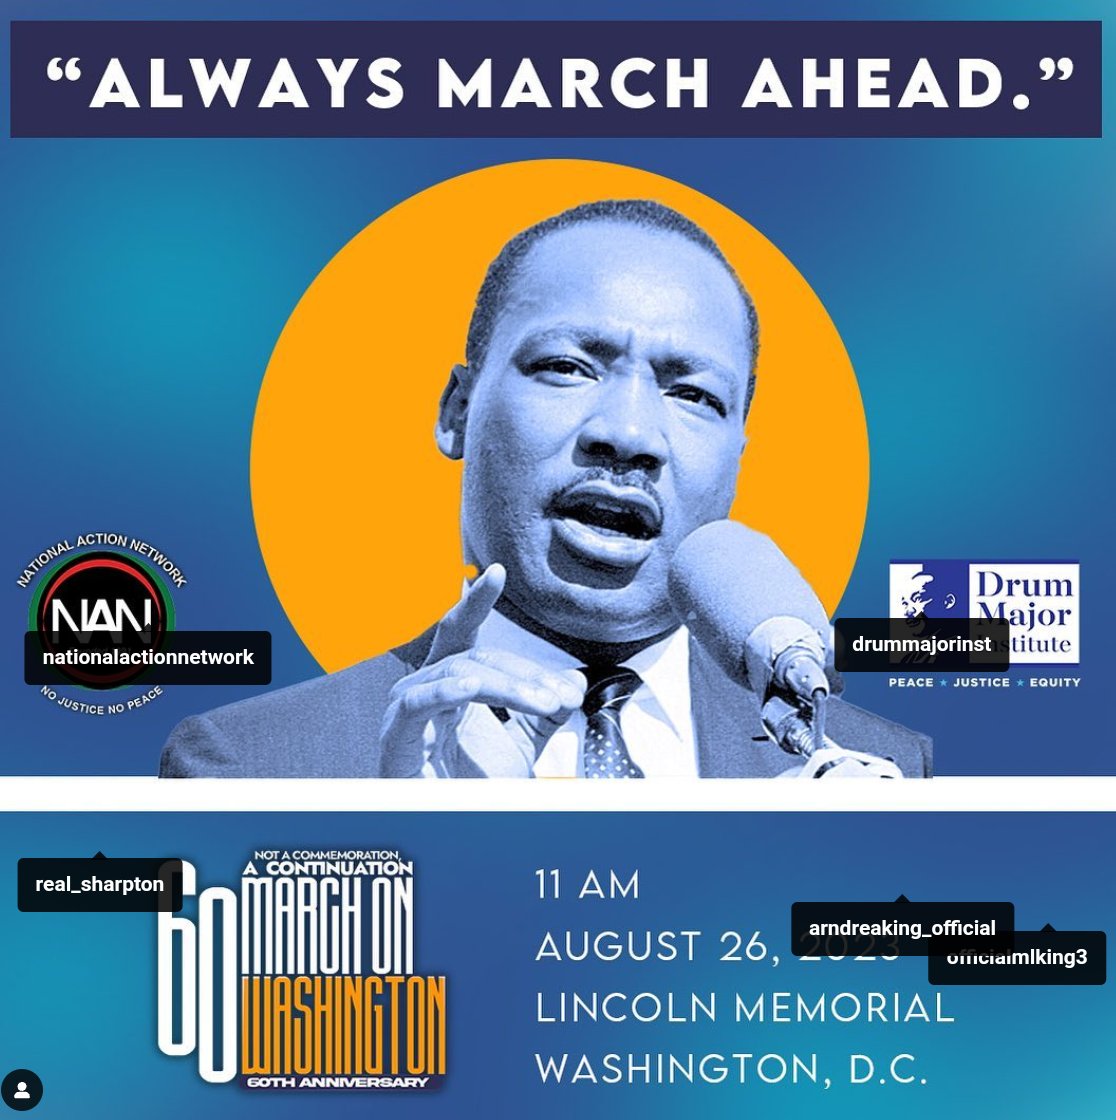 A reminder it's been 60 years since the #MarchOnWashington led by the esteemed Martin Luther King! On August 26th that March will continue in Washington DC at the Lincoln Memorial. Possibly some of you were at the first March,I hope some of you will be at this one! #WeHaveADream